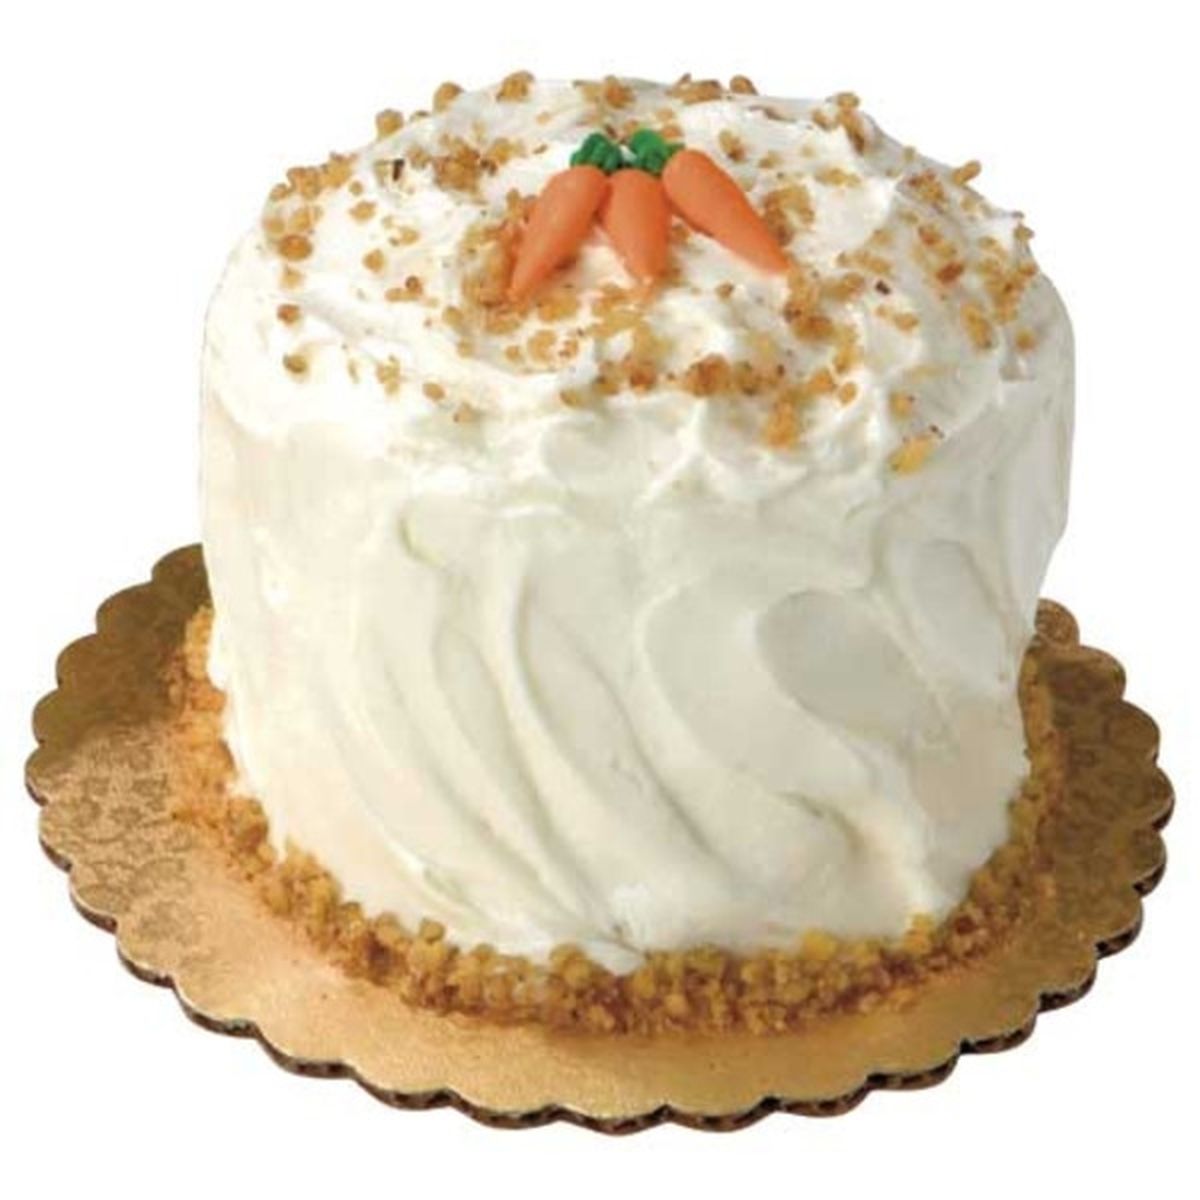 Calories in Wegmans Mini Ultimate Carrot Cake with Walnuts